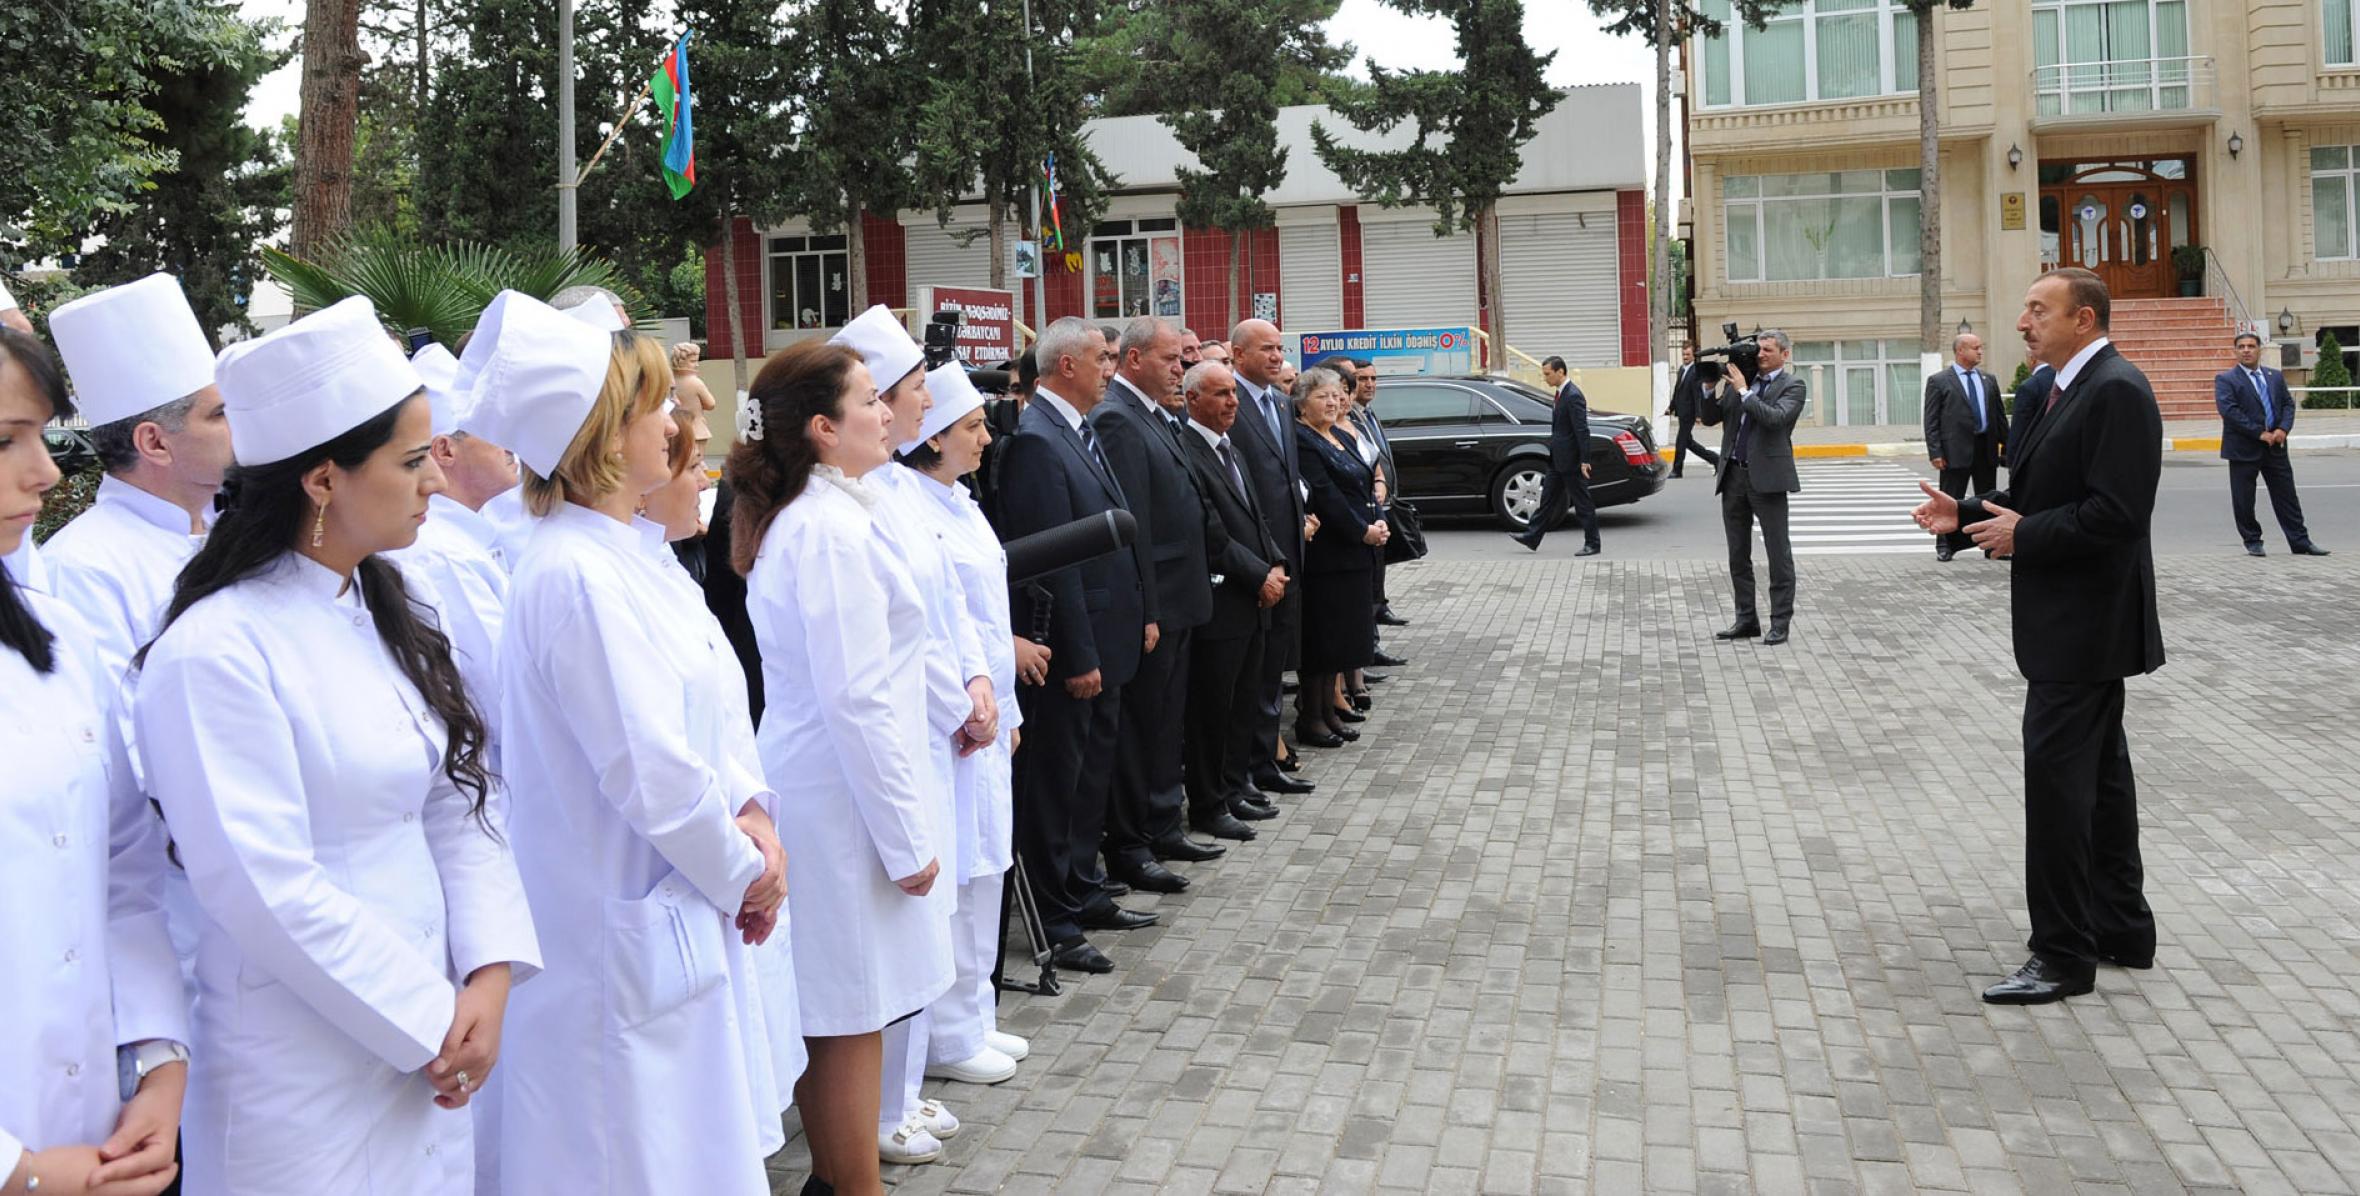 Ilham Aliyev reviewed the Khachmaz District Central Hospital after major overhaul